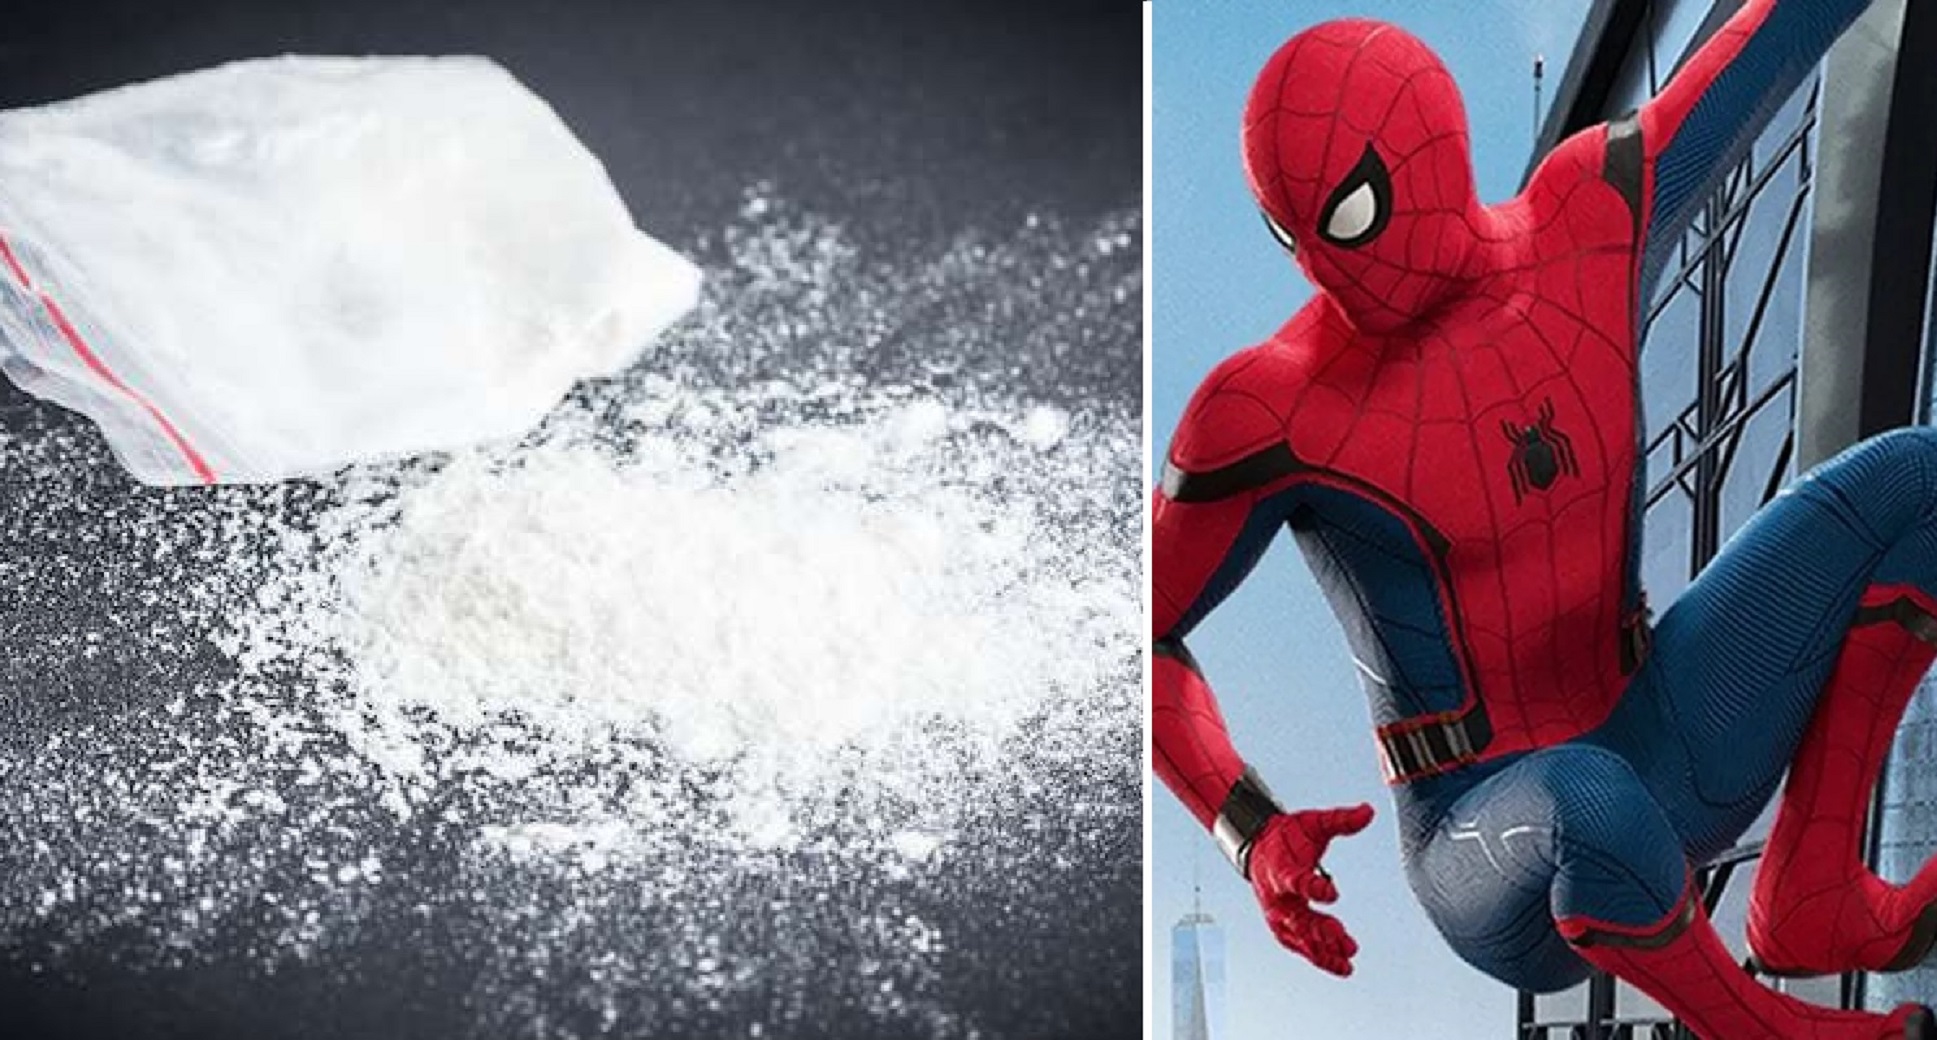 5 Year Old Brings Heroin to School, Says It Made Him Feel Like ‘Spiderman’. Dad Arrested.